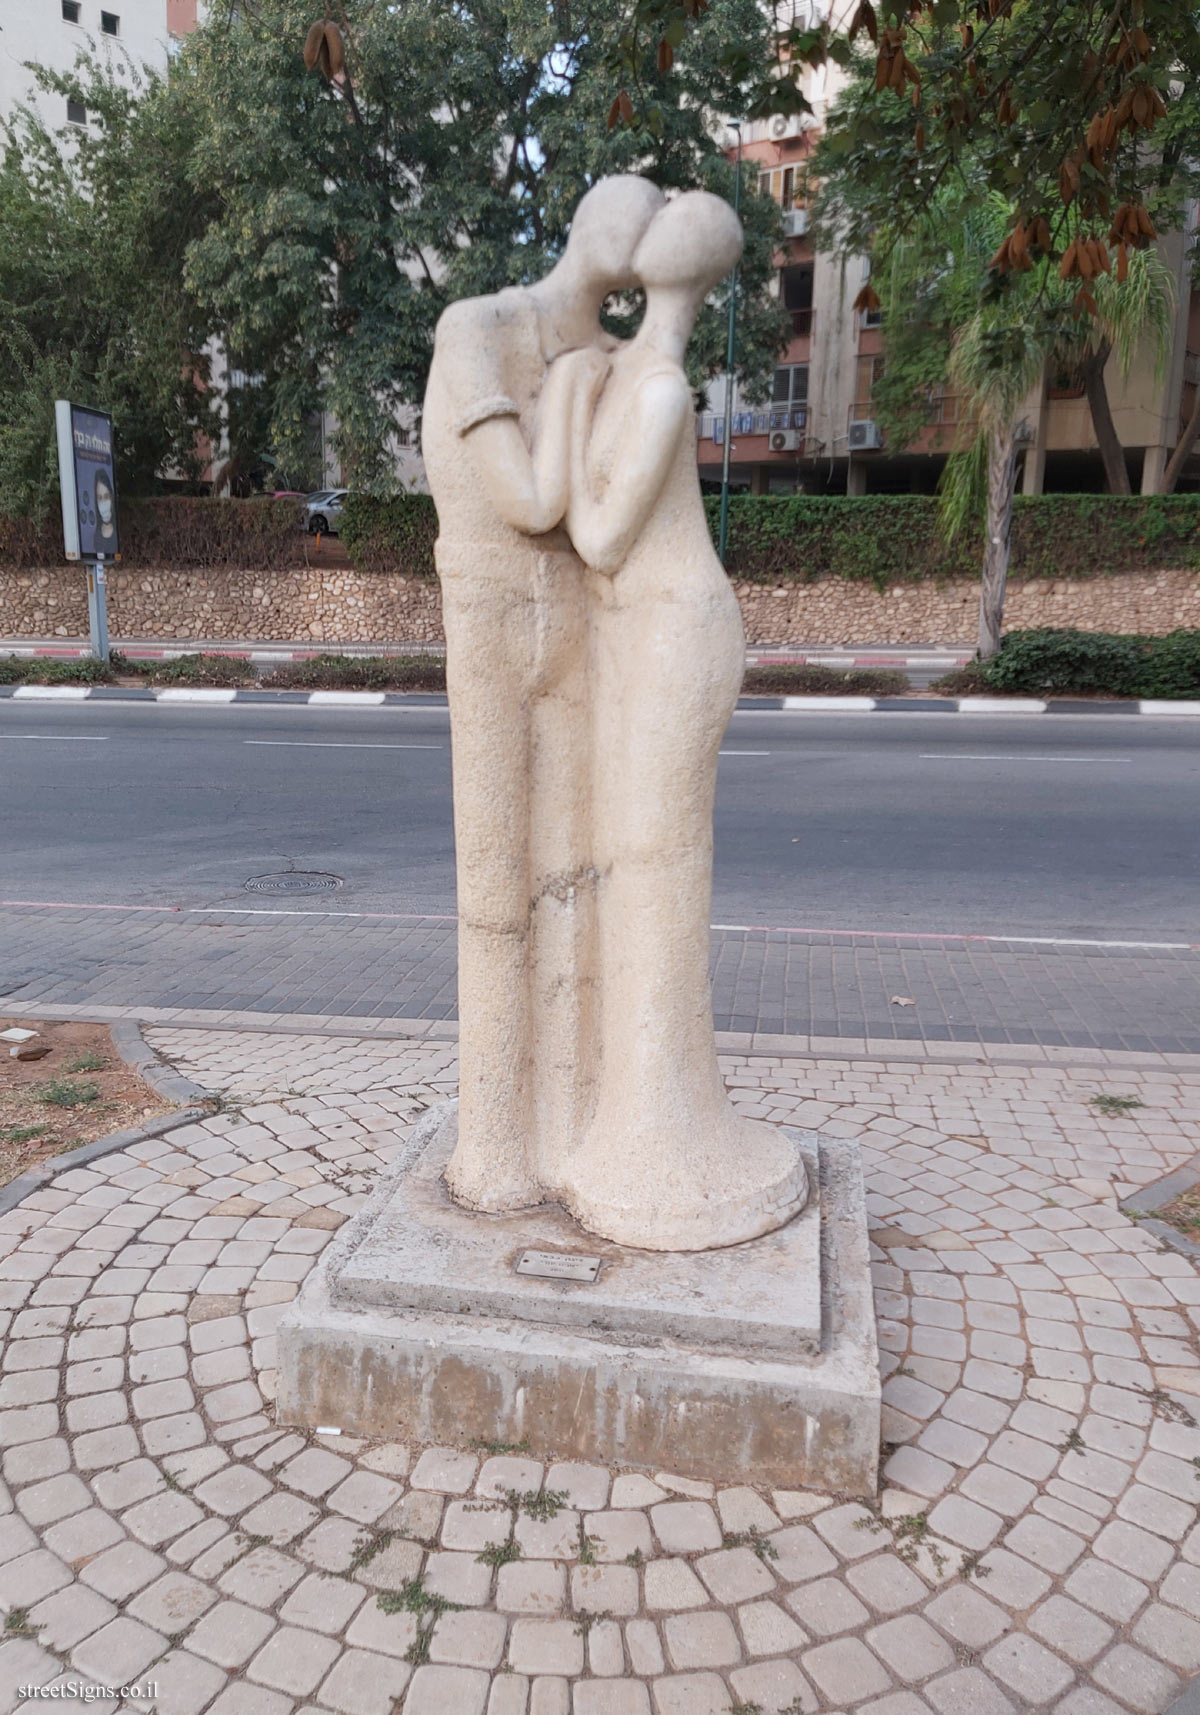 "The two of us together" Outdoor statue of Dina Babay - Egoz St 7, Kiryat Ono, Israel